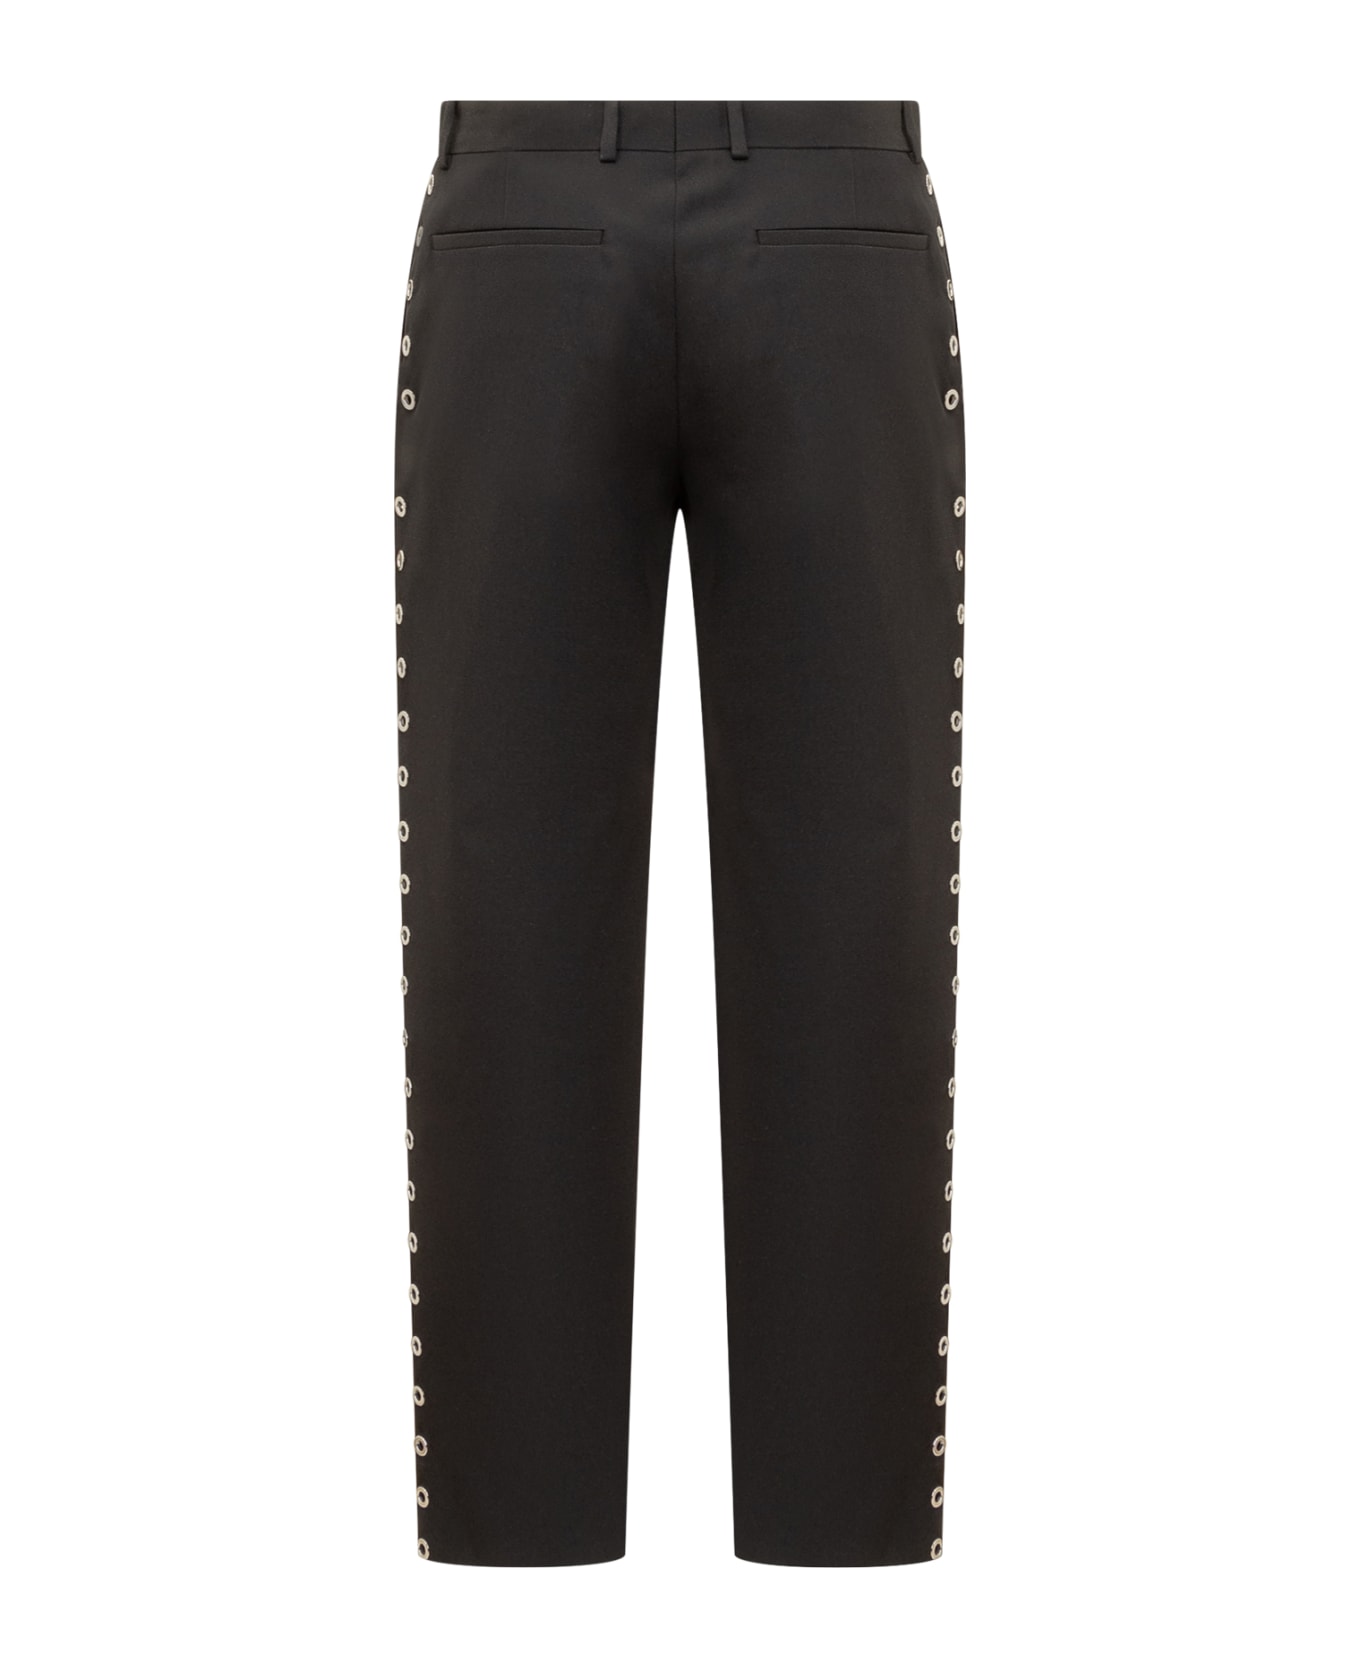 Off-White Wool Pants With Eyelets - Black ボトムス